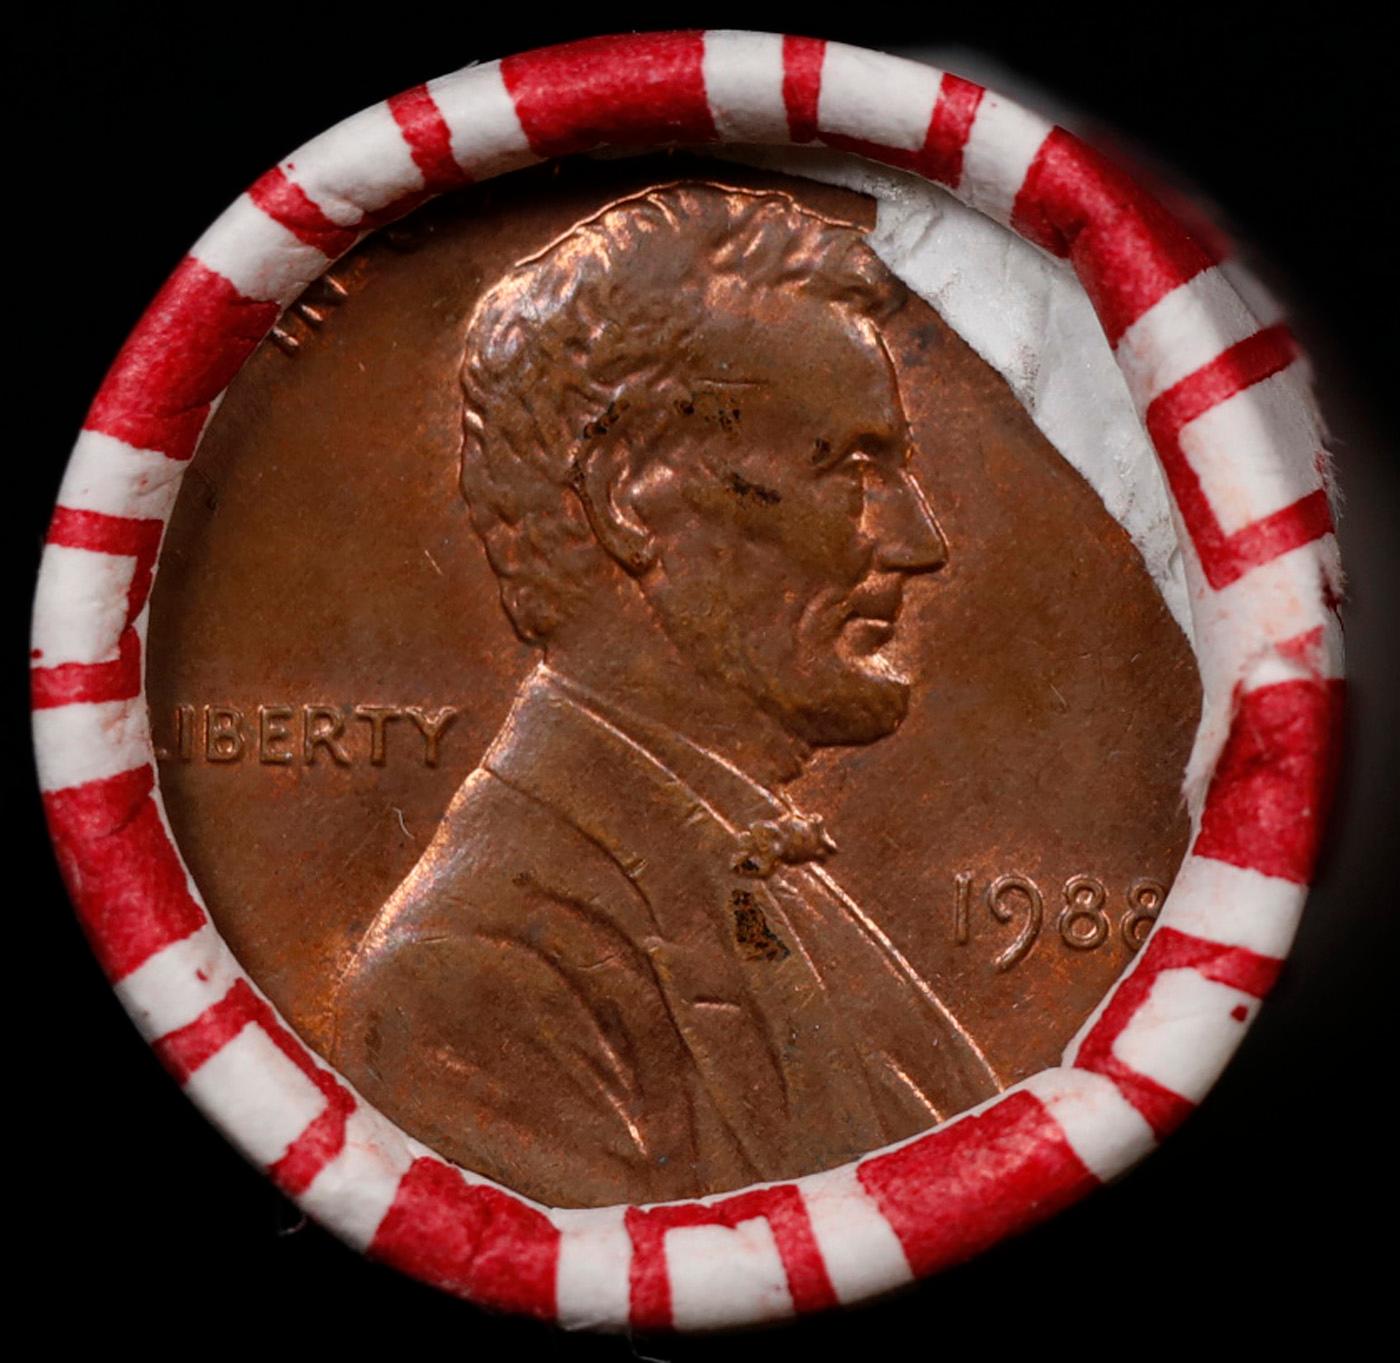 CRAZY Penny Wheel Buy THIS 1988-p solid Red BU Lincoln 1c roll & get 1-10 BU Red rolls FREE WOW